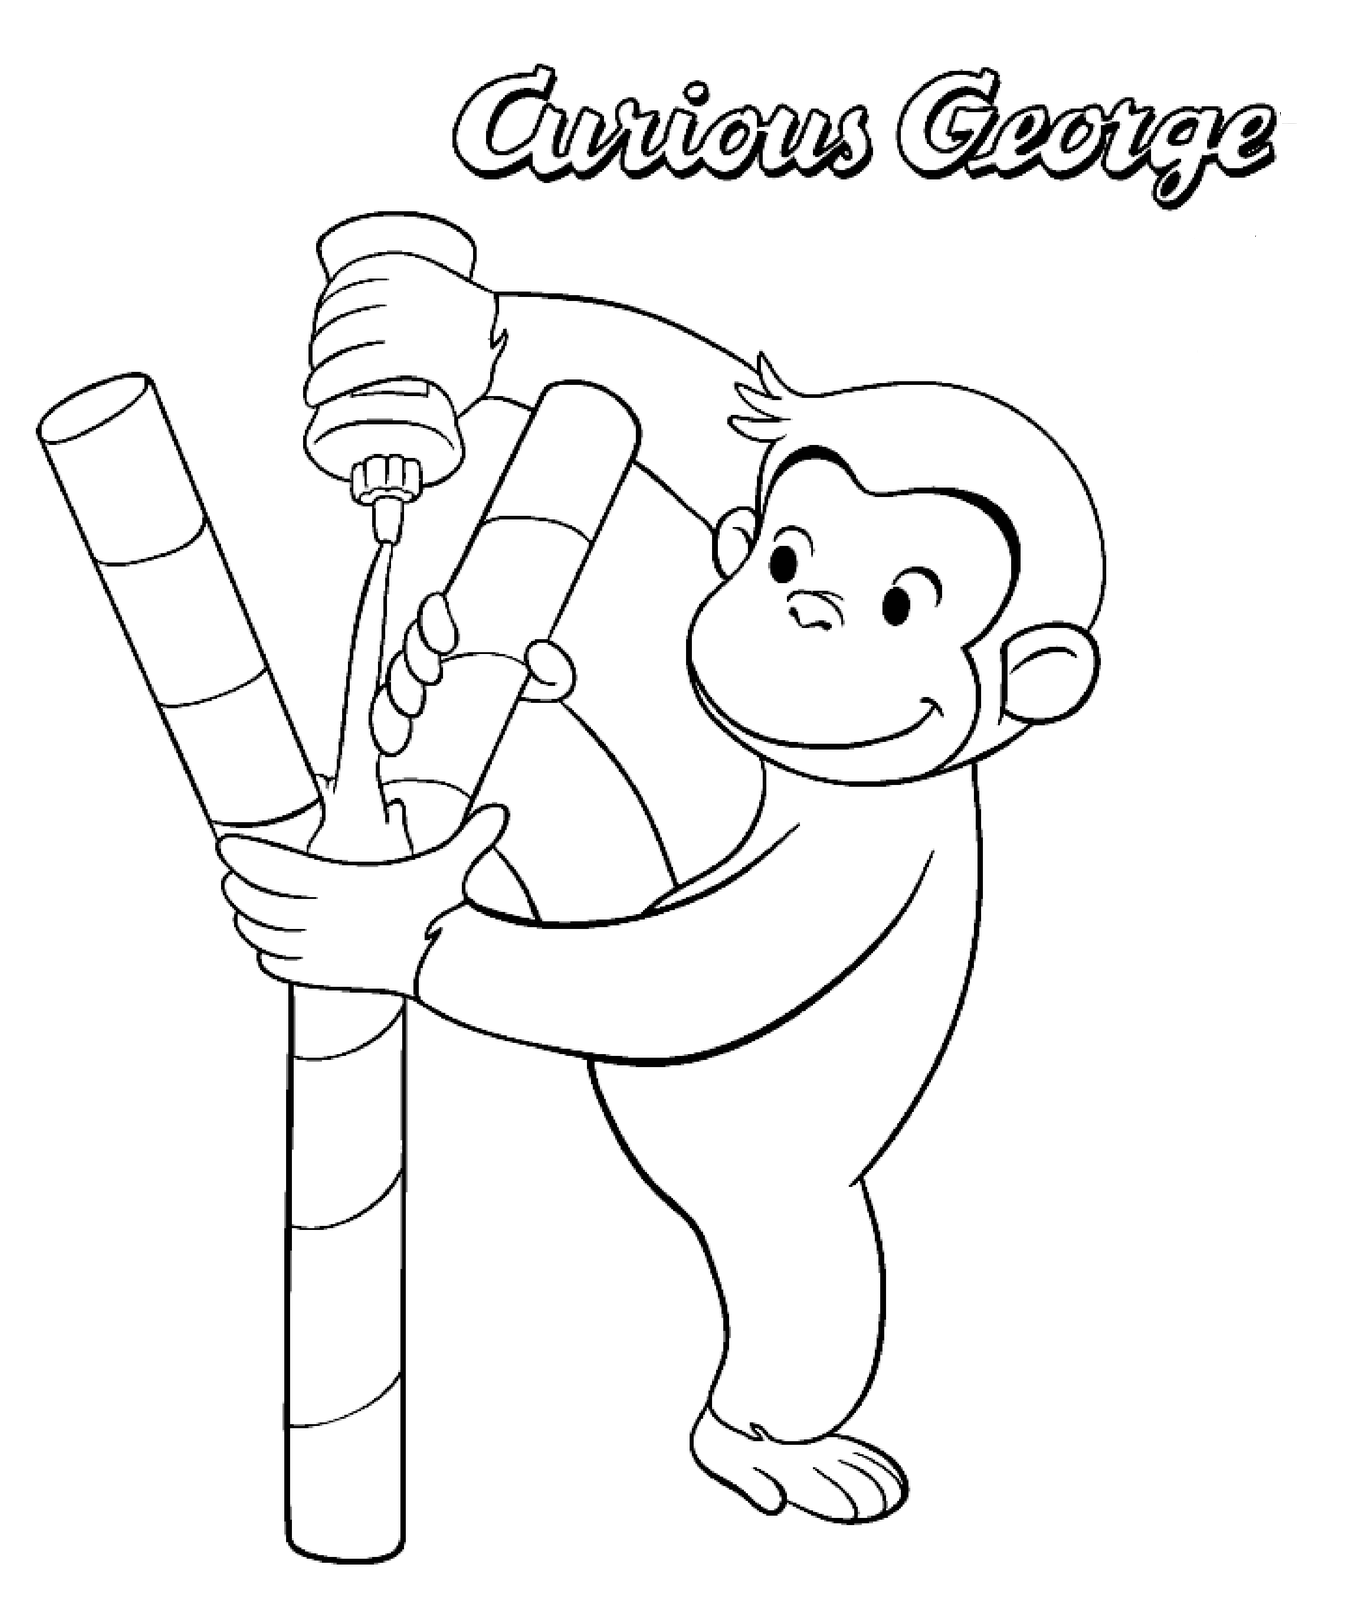 Curious George Drawings coloring ~ Child Coloring